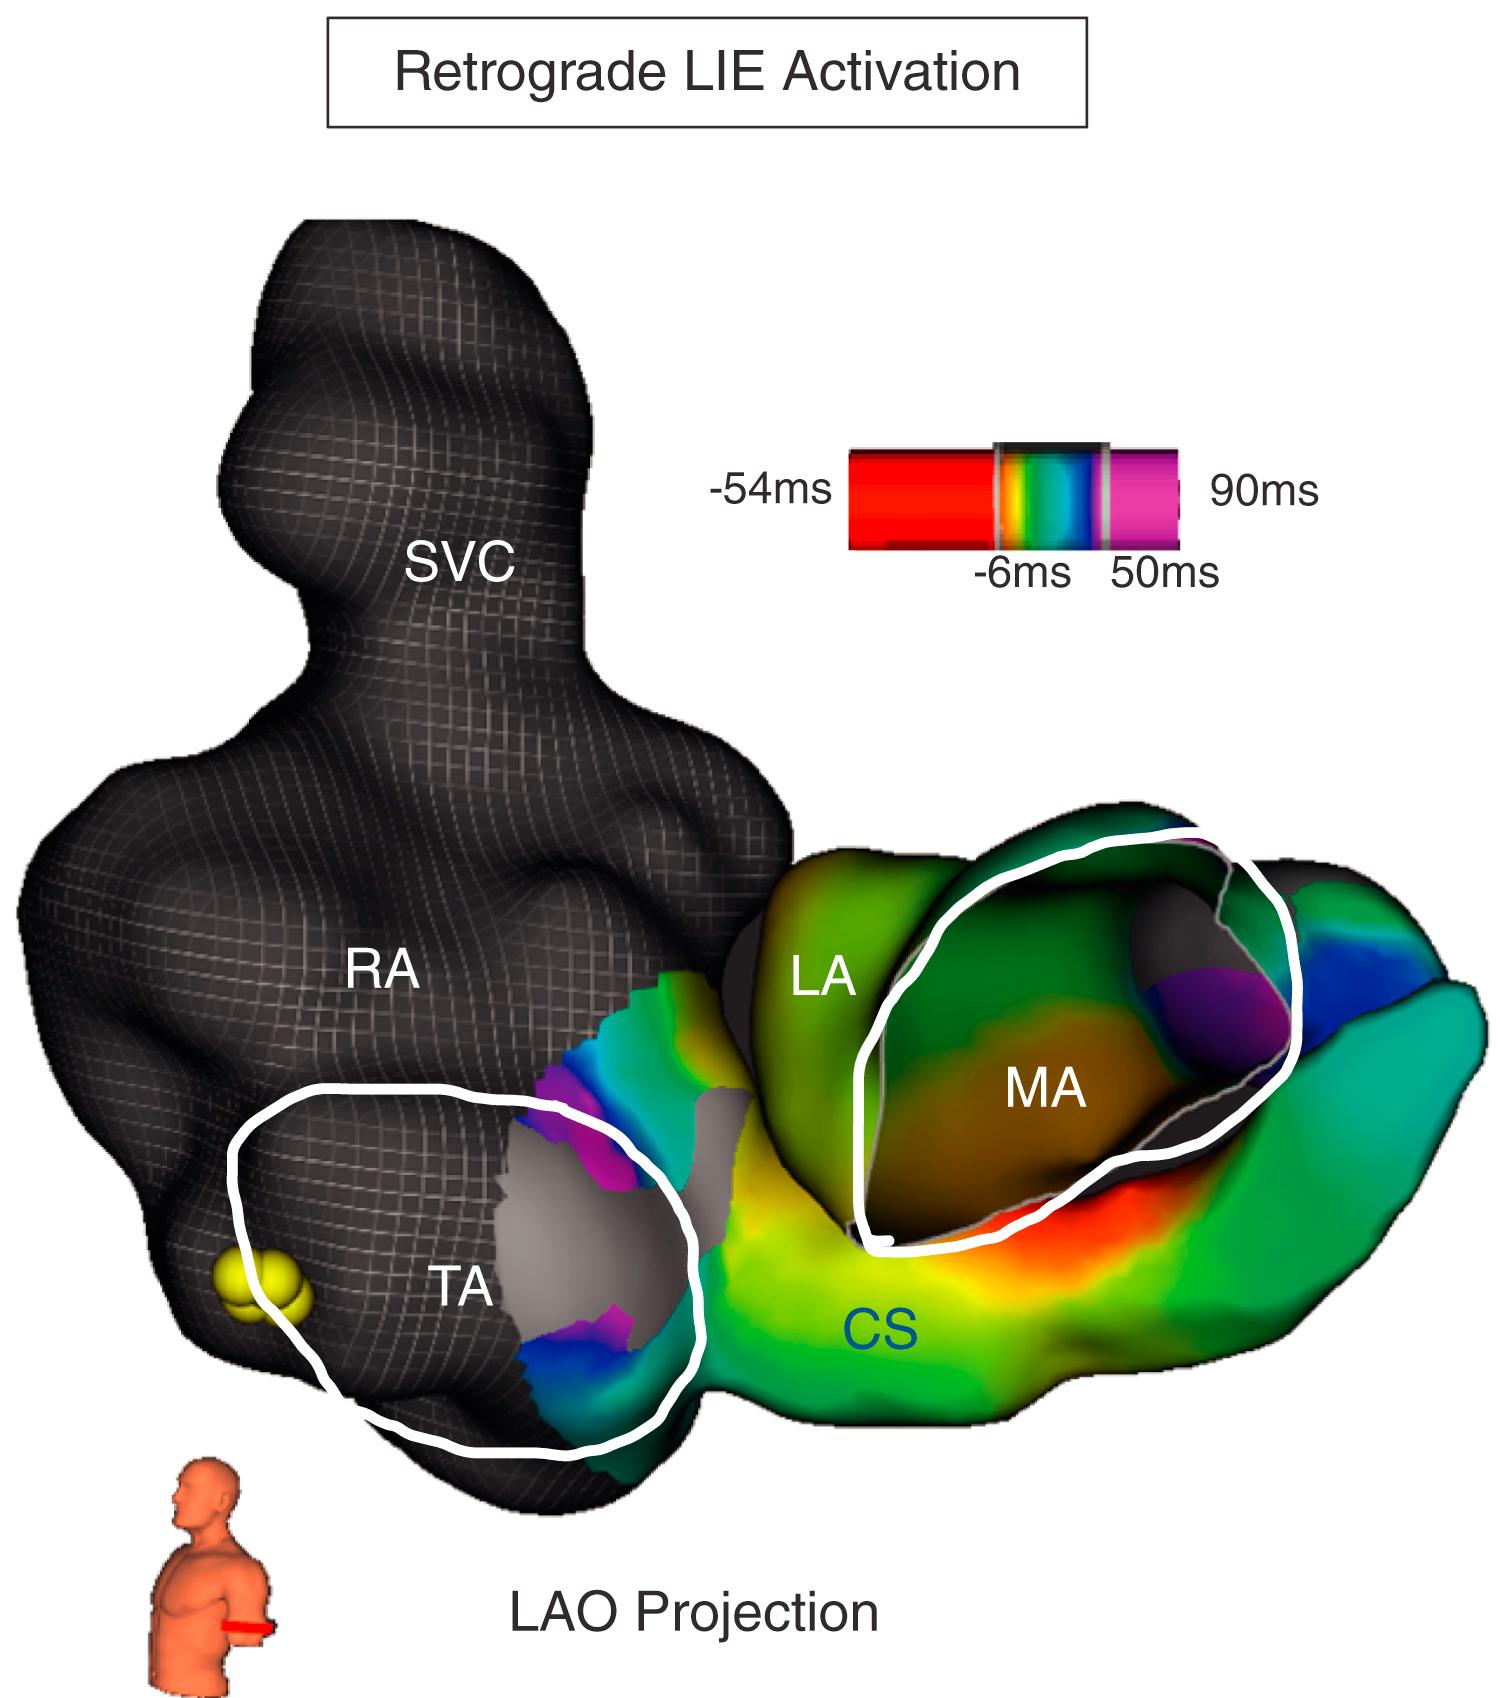 Fig. 72.10, High-density three-dimensional map of activation during retrograde conduction over the leftward inferior extension (LIE) of the atrioventricular (AV) node.